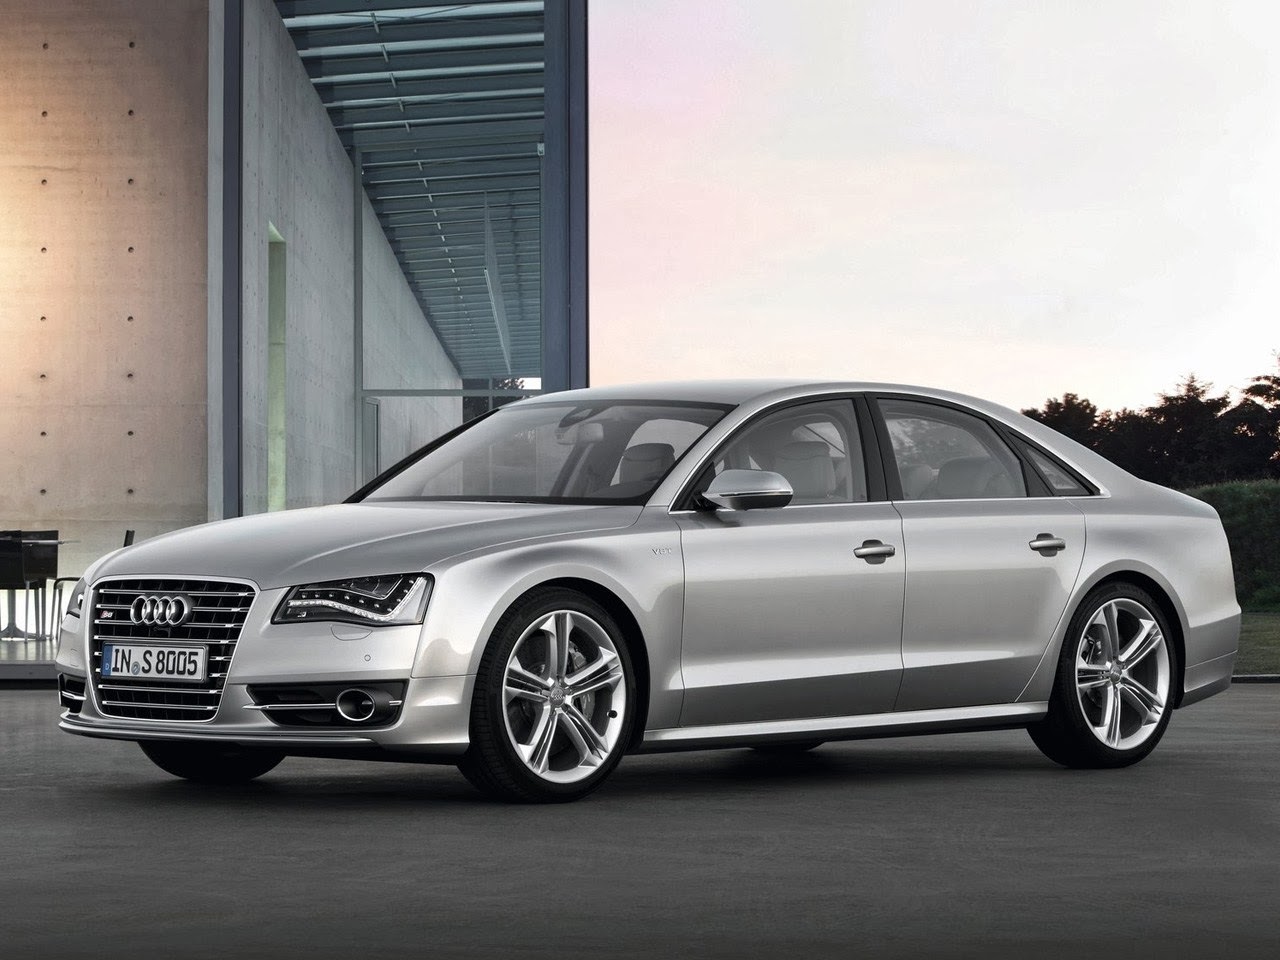 This Audi S6 Avant Car Wallpaper Into Your Pc iPhone Background Etc